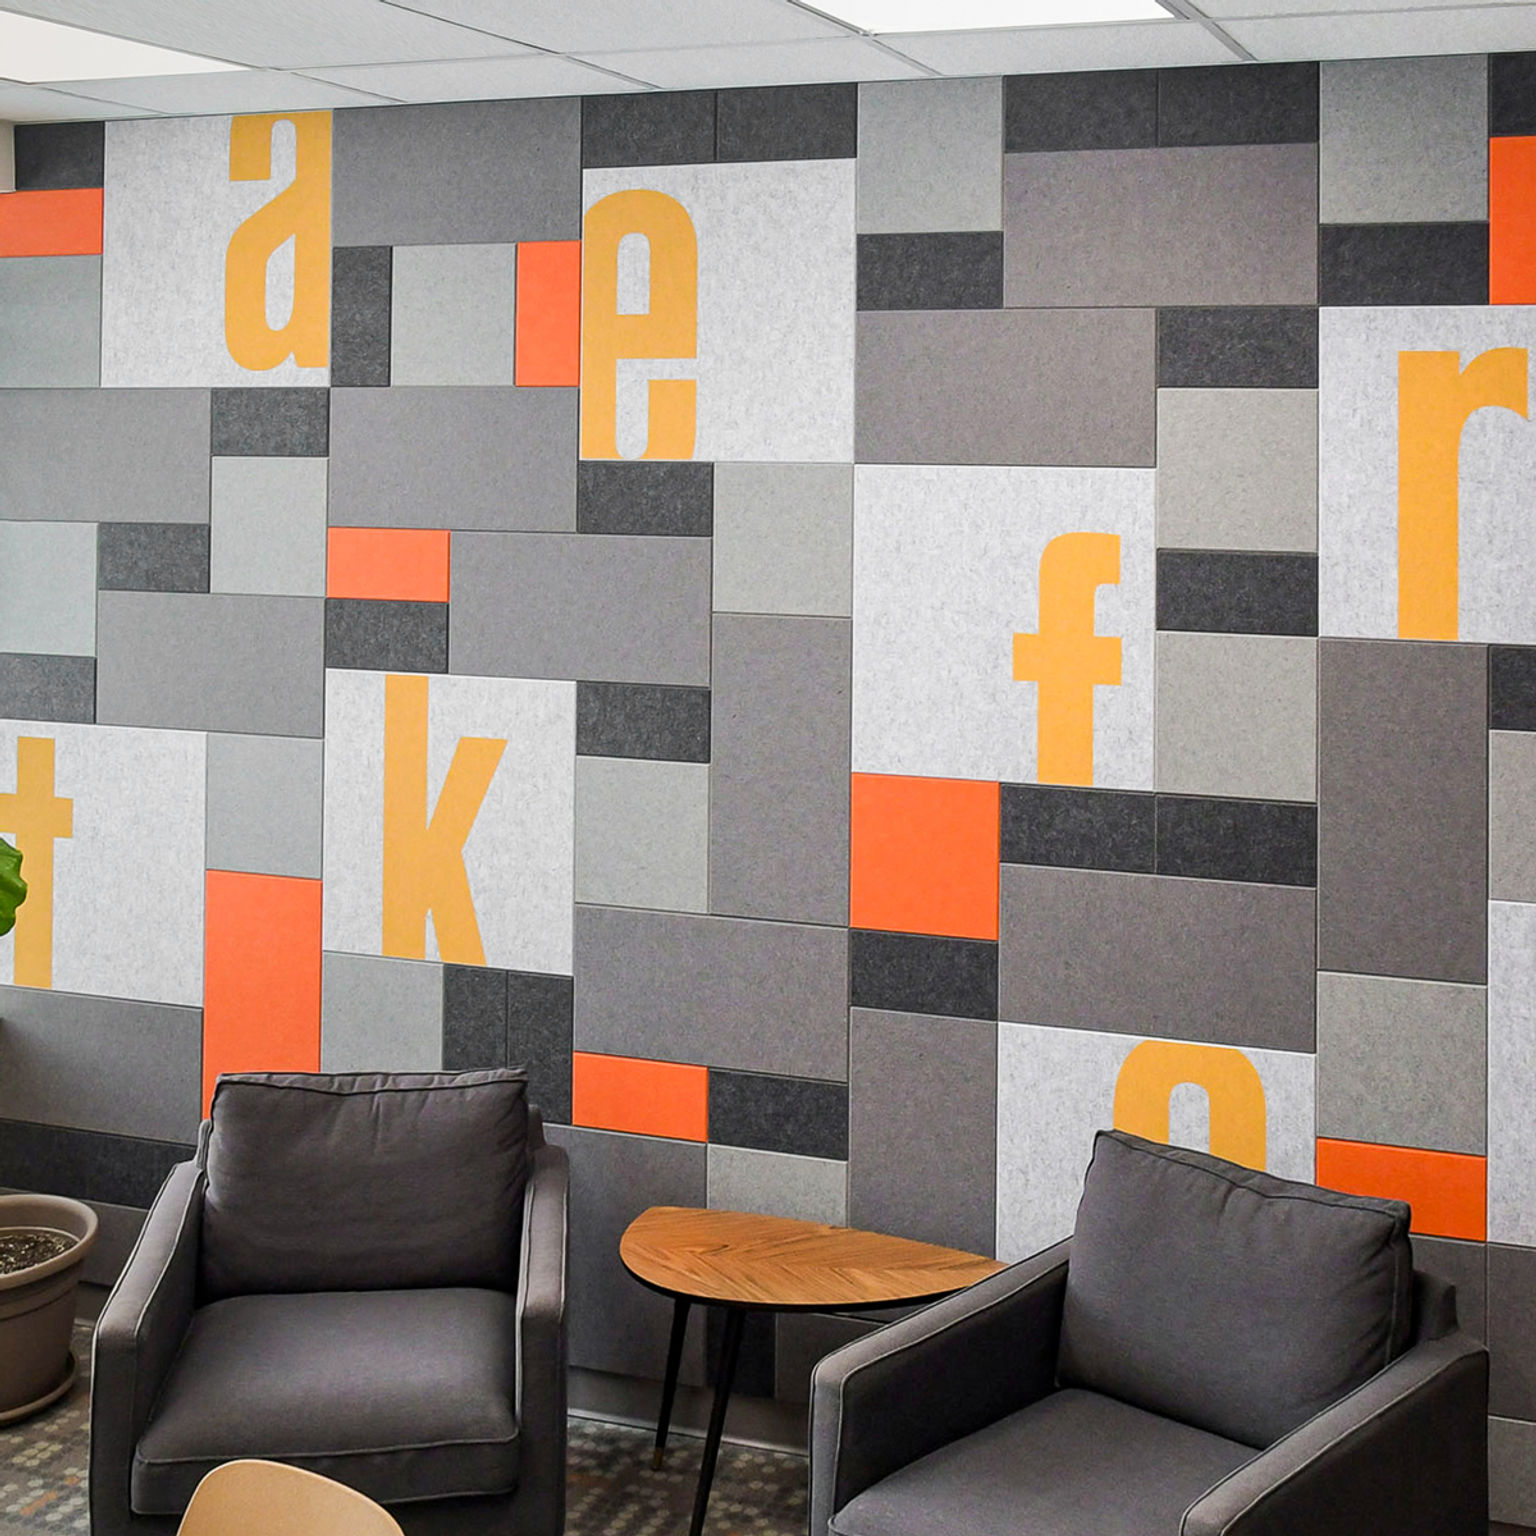 An office wall with an acoustic wall tile installation made up of rectangular tiles of various sizes and shades of gray accented by custom printing and bright orange tiles.